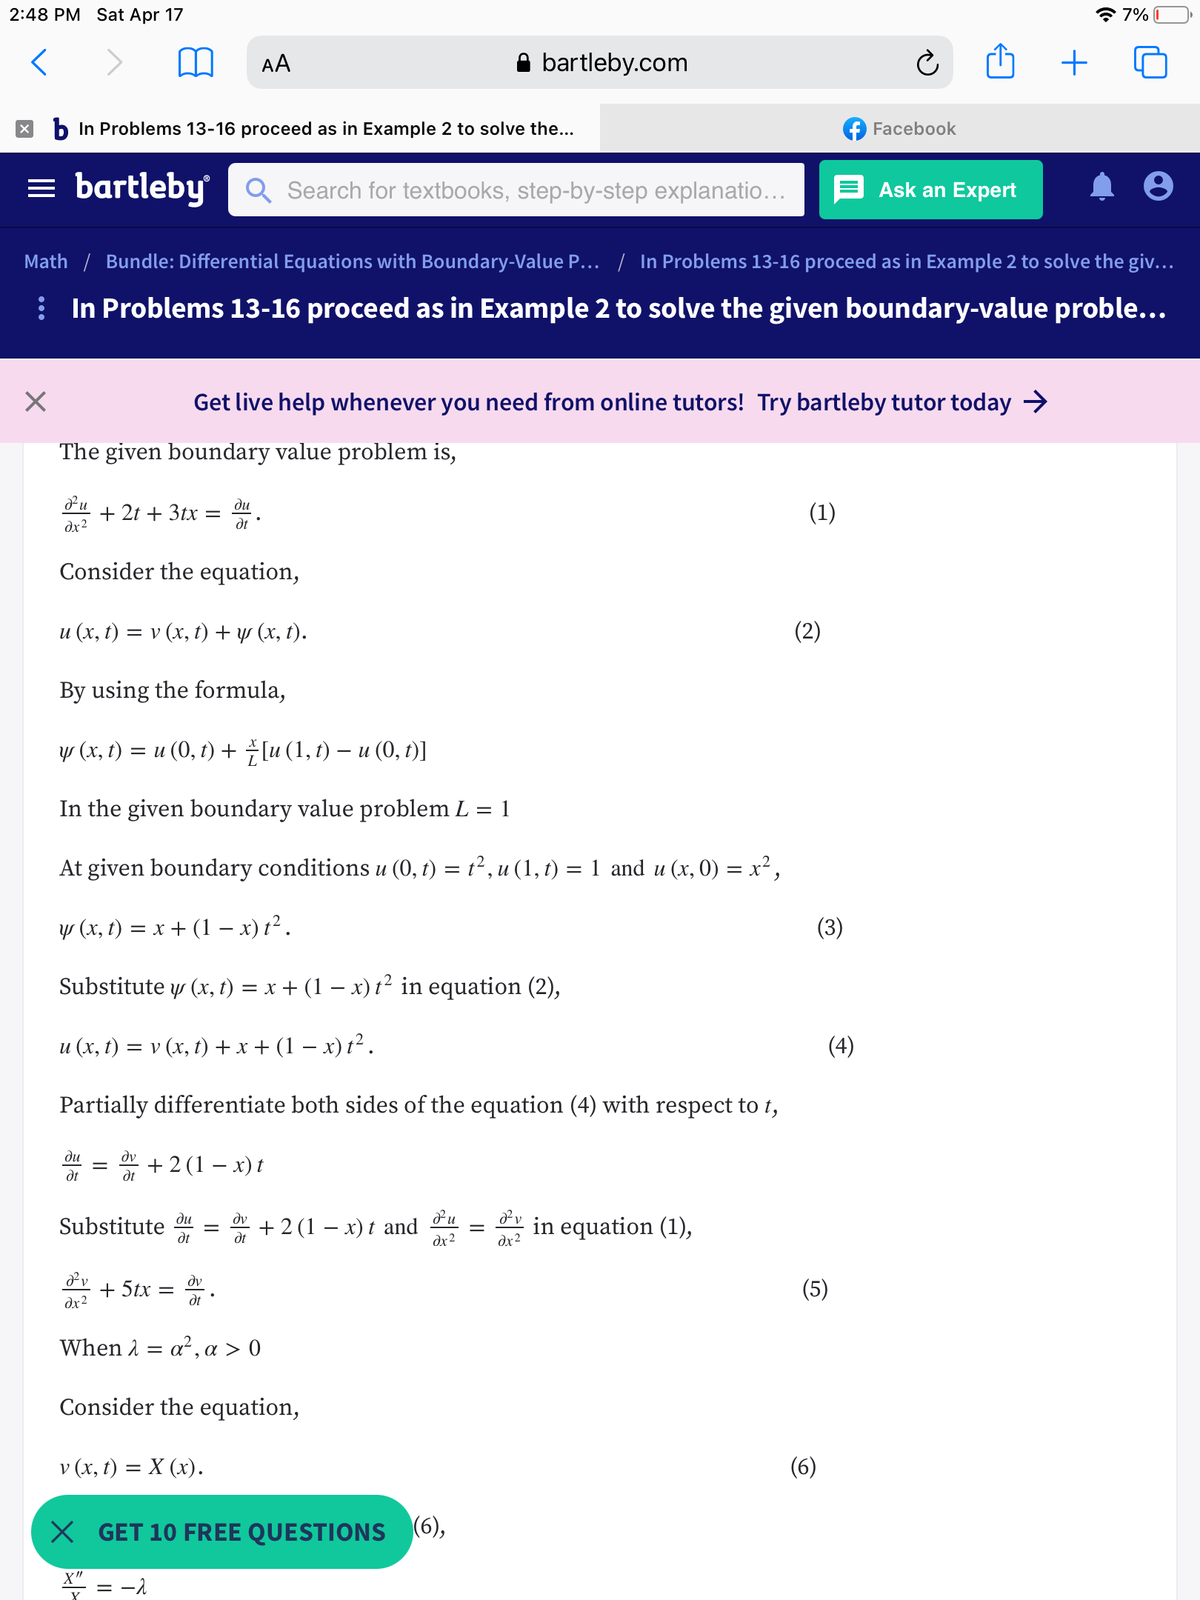 2:48 PM Sat Apr 17
* 7% I
AA
bartleby.com
X b In Problems 13-16 proceed as in Example 2 to solve the...
f Facebook
= bartleby
Q Search for textbooks, step-by-step explanatio...
E Ask an Expert
Math / Bundle: Differential Equations with Boundary-Value P... | In Problems 13-16 proceed as in Example 2 to solve the giv...
i In Problems 13-16 proceed as in Example 2 to solve the given boundary-value proble...
Get live help whenever you need from online tutors! Try bartleby tutor today >
The given boundary value problem is,
ди
+ 2t + 3tx
dx2
(1)
%|
dt
Consider the equation,
u (x, t) = v (x, t)+ y (x, t).
(2)
By using the formula,
у (х, ) %3D и (0, г) +lu (1, 1) — и (0, 0)]
In the given boundary value problem L = 1
At given boundary conditions u (0, t) = t² , u (1, t) = 1 and u (x, 0) = x² ,
y (x, t) = x + (1 – x) t² .
Substitute y (x, t) = x + (1 – x) t² in equation (2),
u (x, t) = v (x, t) + x + (1 – x) t² .
(4)
Partially differentiate both sides of the equation (4) with respect to t,
ди
+ 2(1 – x) t
dt
dt
Substitute u
dt
dv
+ 2 (1 – x) t and
dx2
in equation (1),
dt
dx2
+ 5tx
dv
dt
(5)
dx2
When 1
a², a > 0
Consider the equation,
v (x, t) = X (x).
(6)
X GET 10 FREE QUESTIONS (6),
X"
= -1
II
